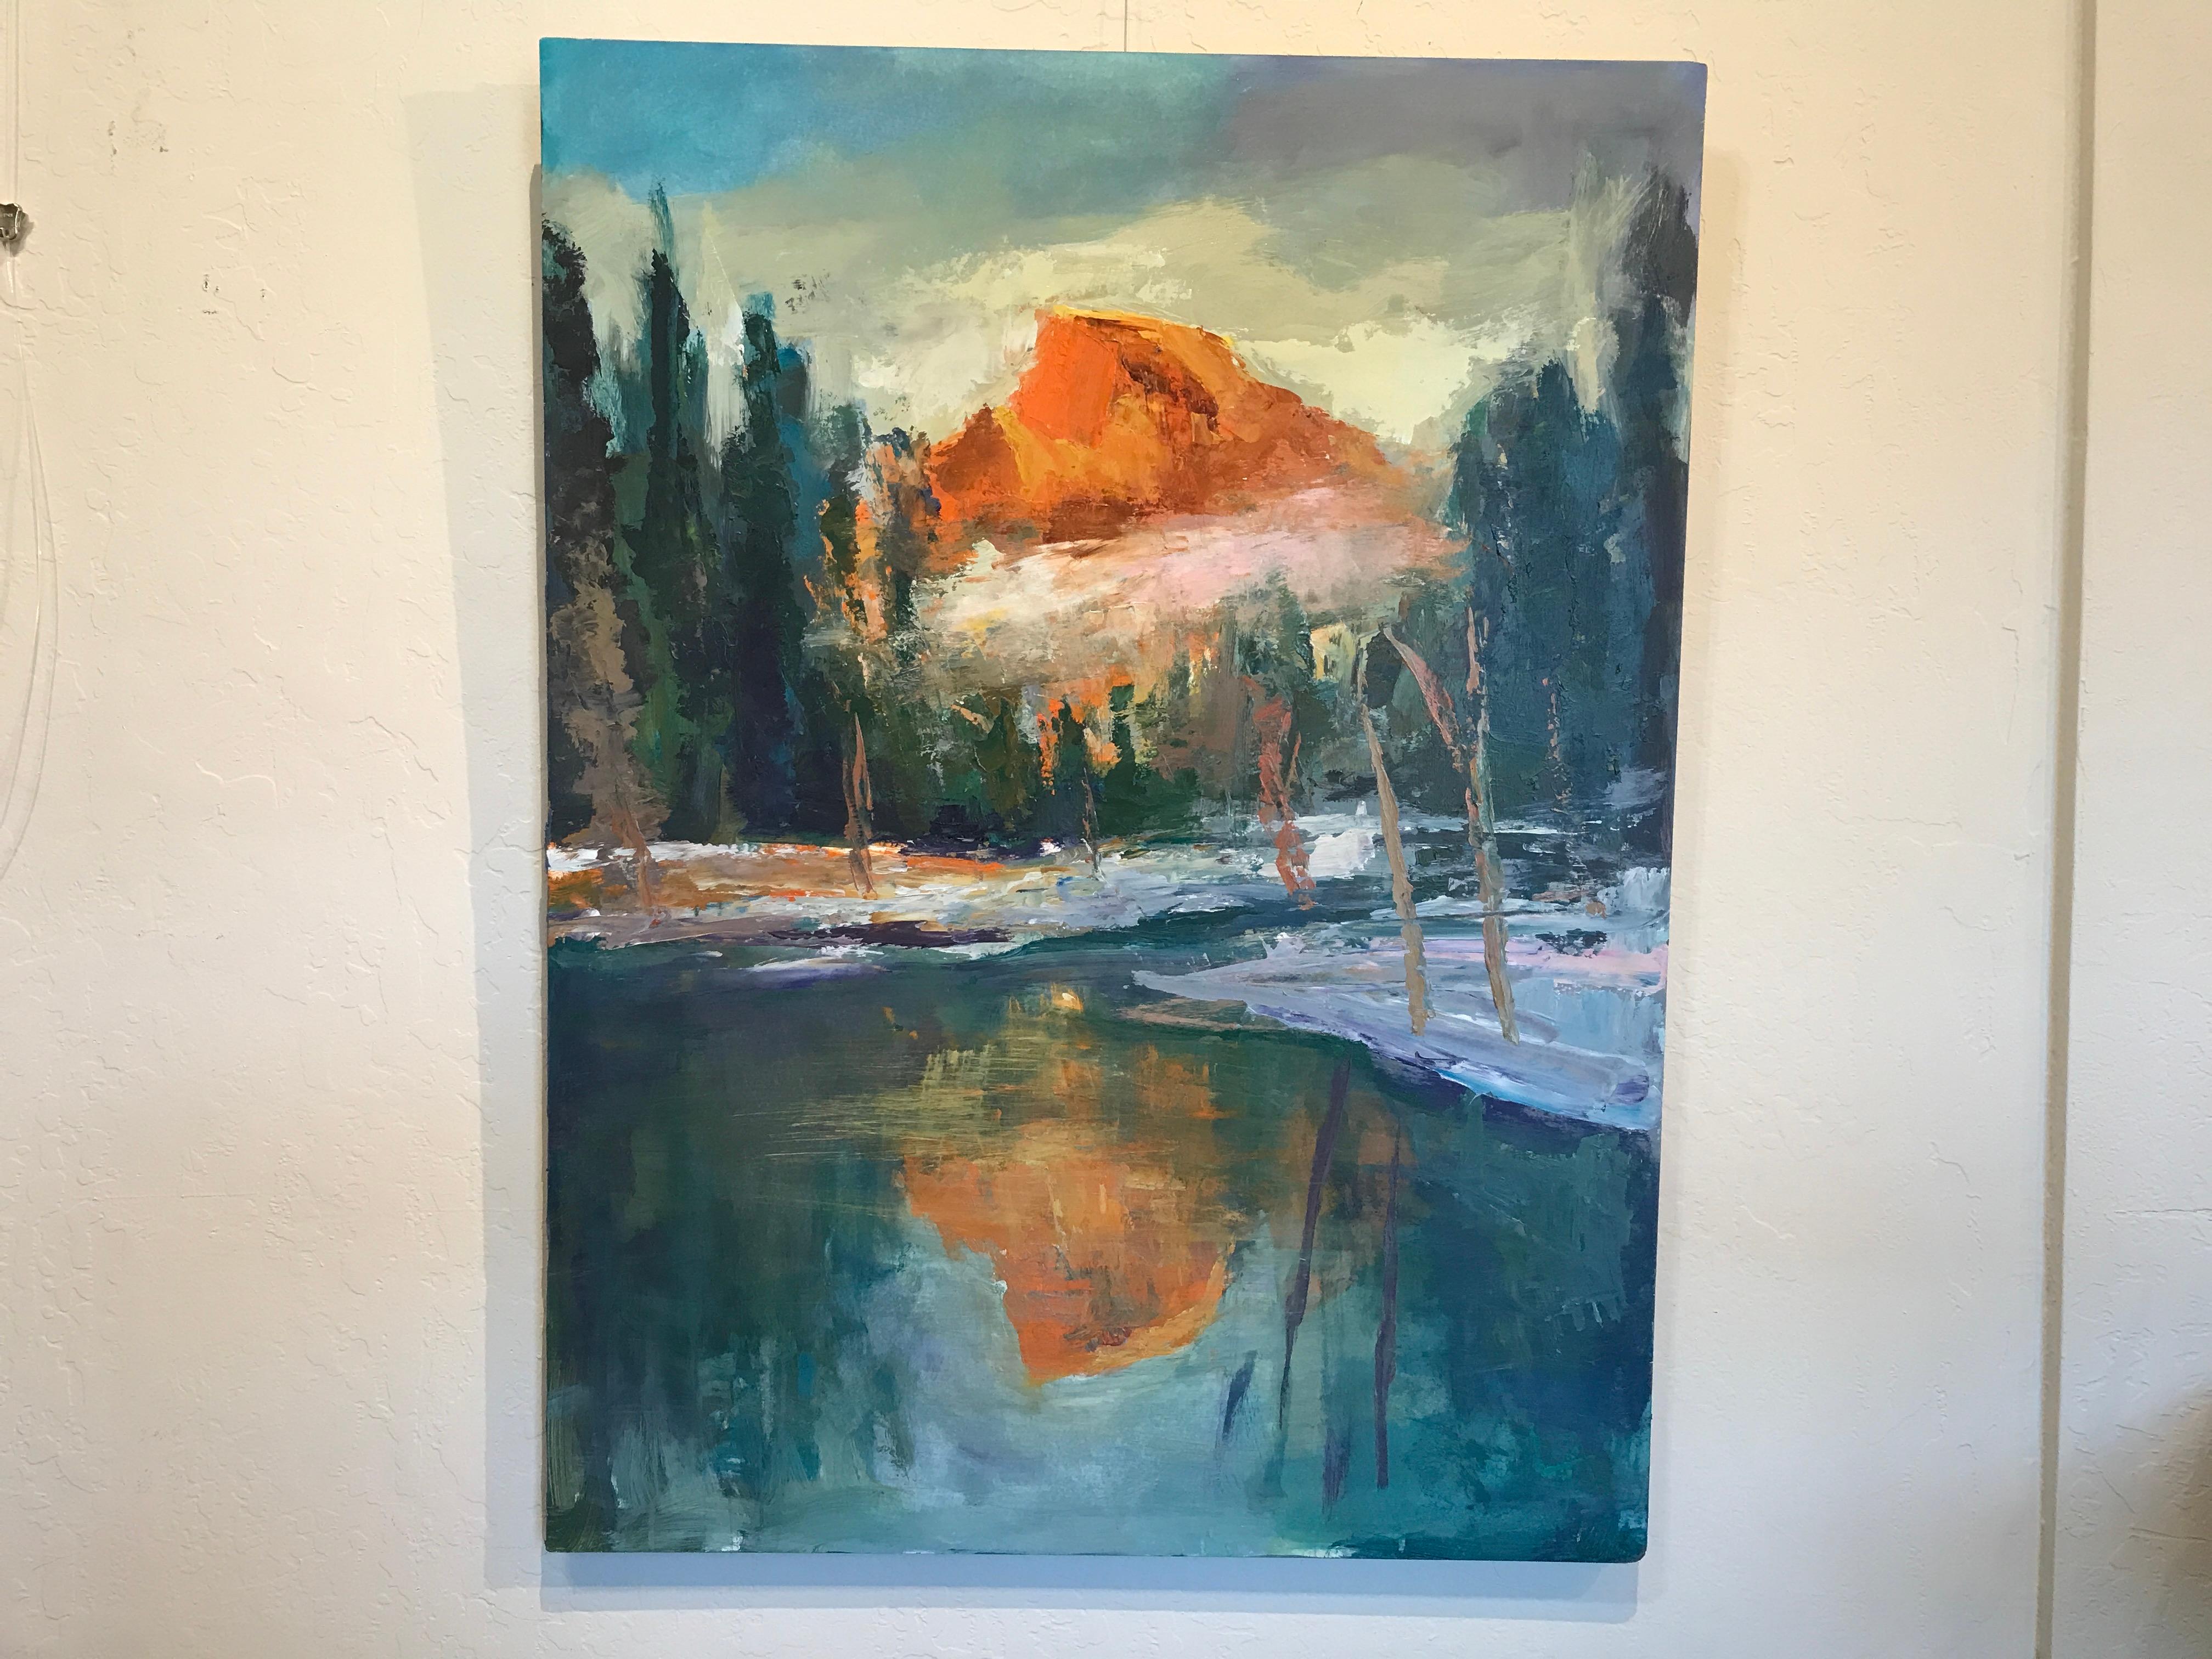 Half Dome Reflection - Painting by Lilli-anne Price